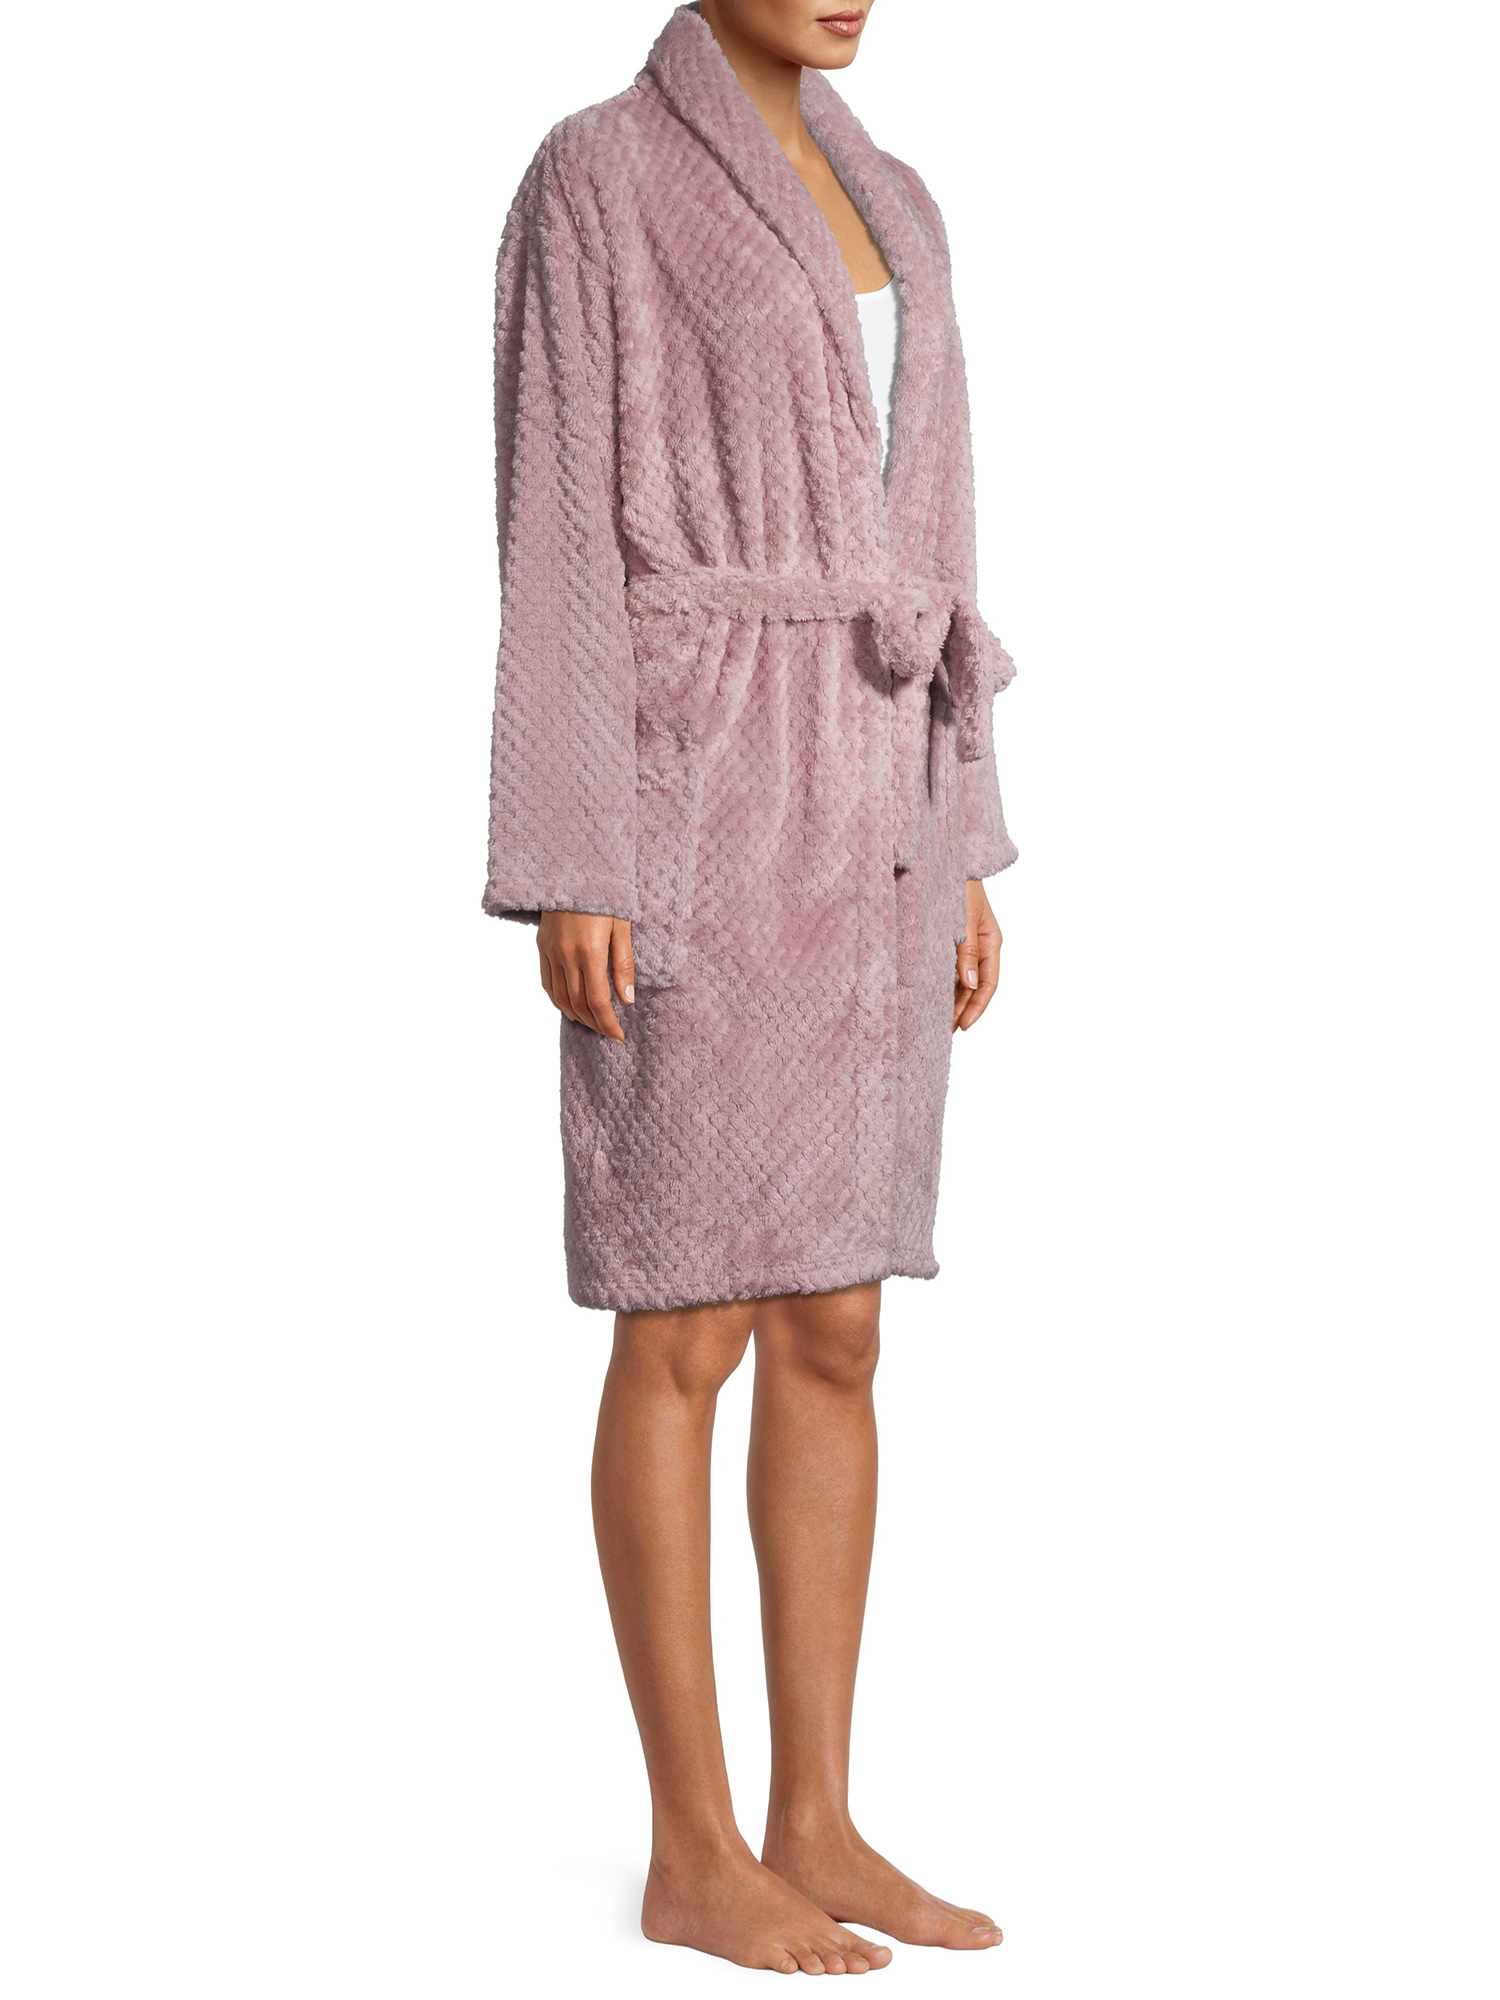 The Cozy Corner Club Durable Easy Care Textured Evening Robe (Women's), 1 Pack - image 4 of 7